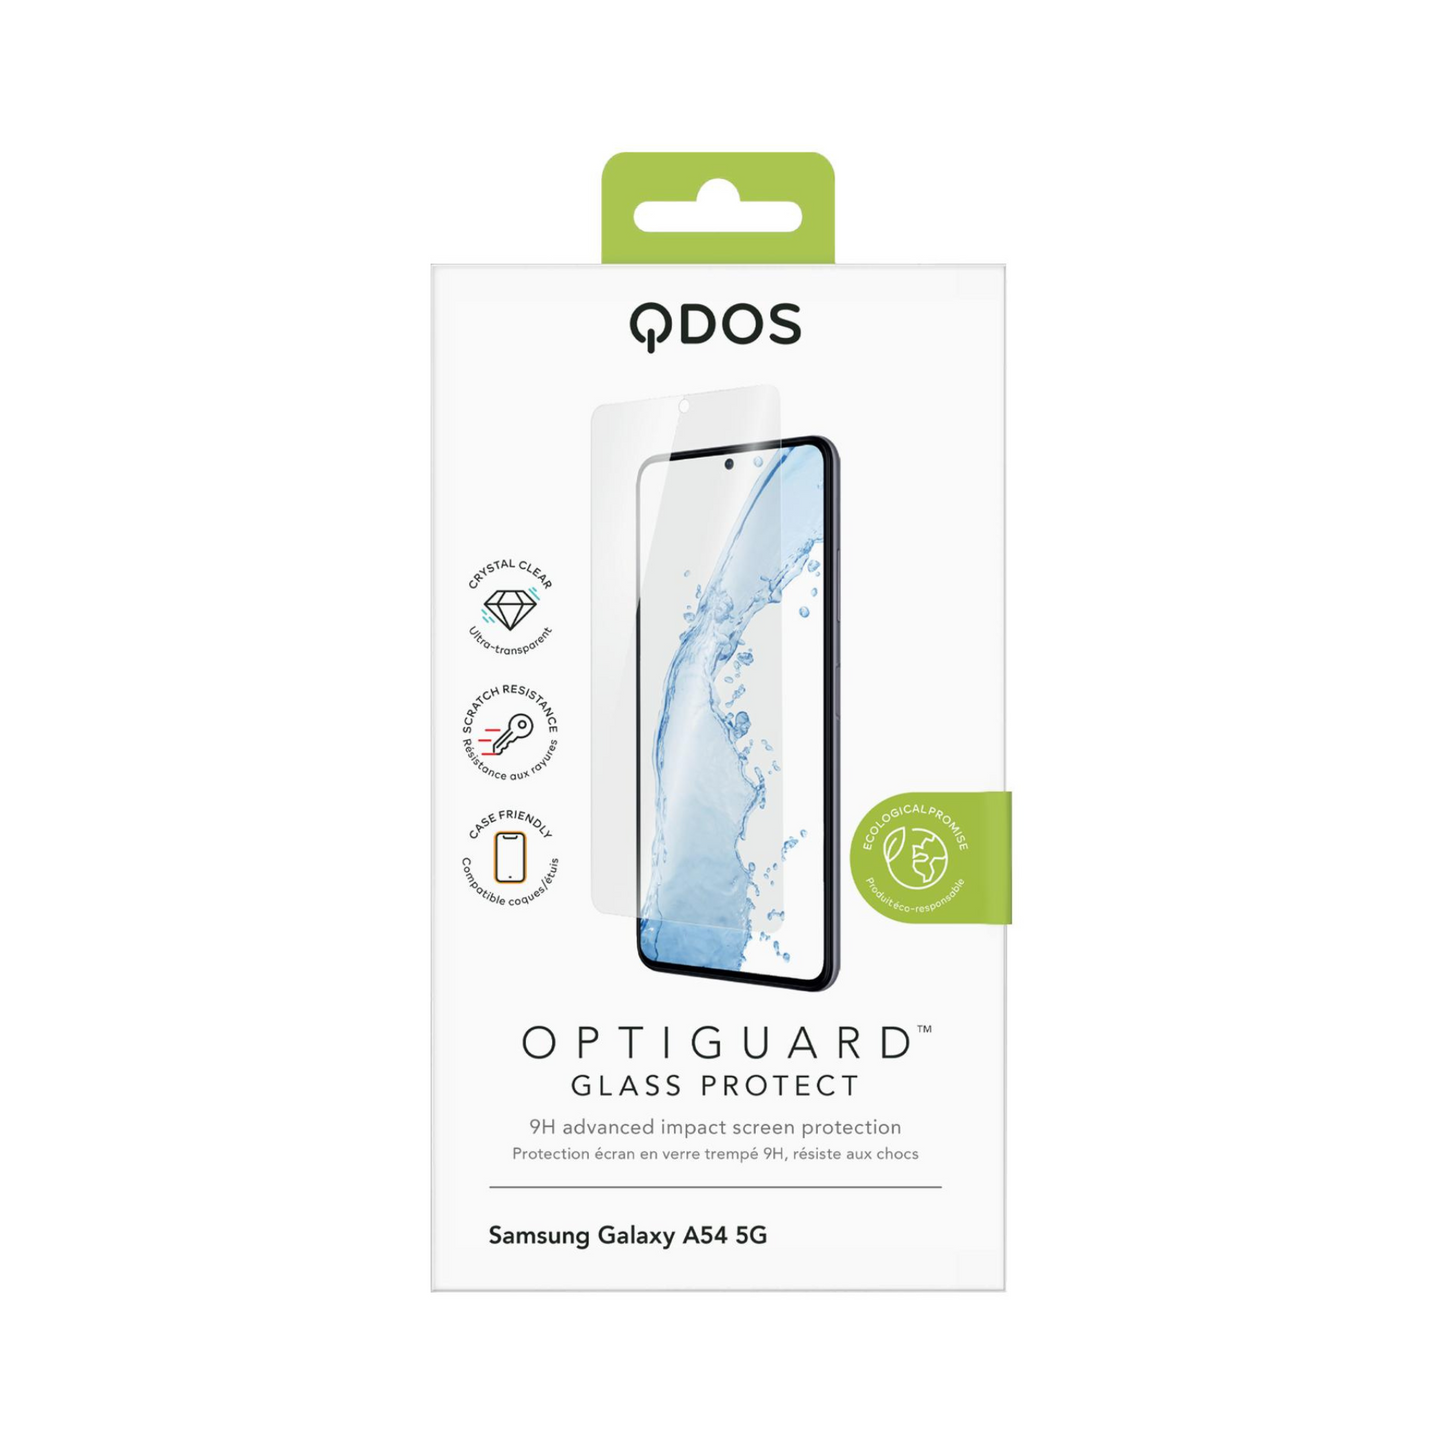 QDOS Glass Protect Screen Protector for Samsung Galaxy A54